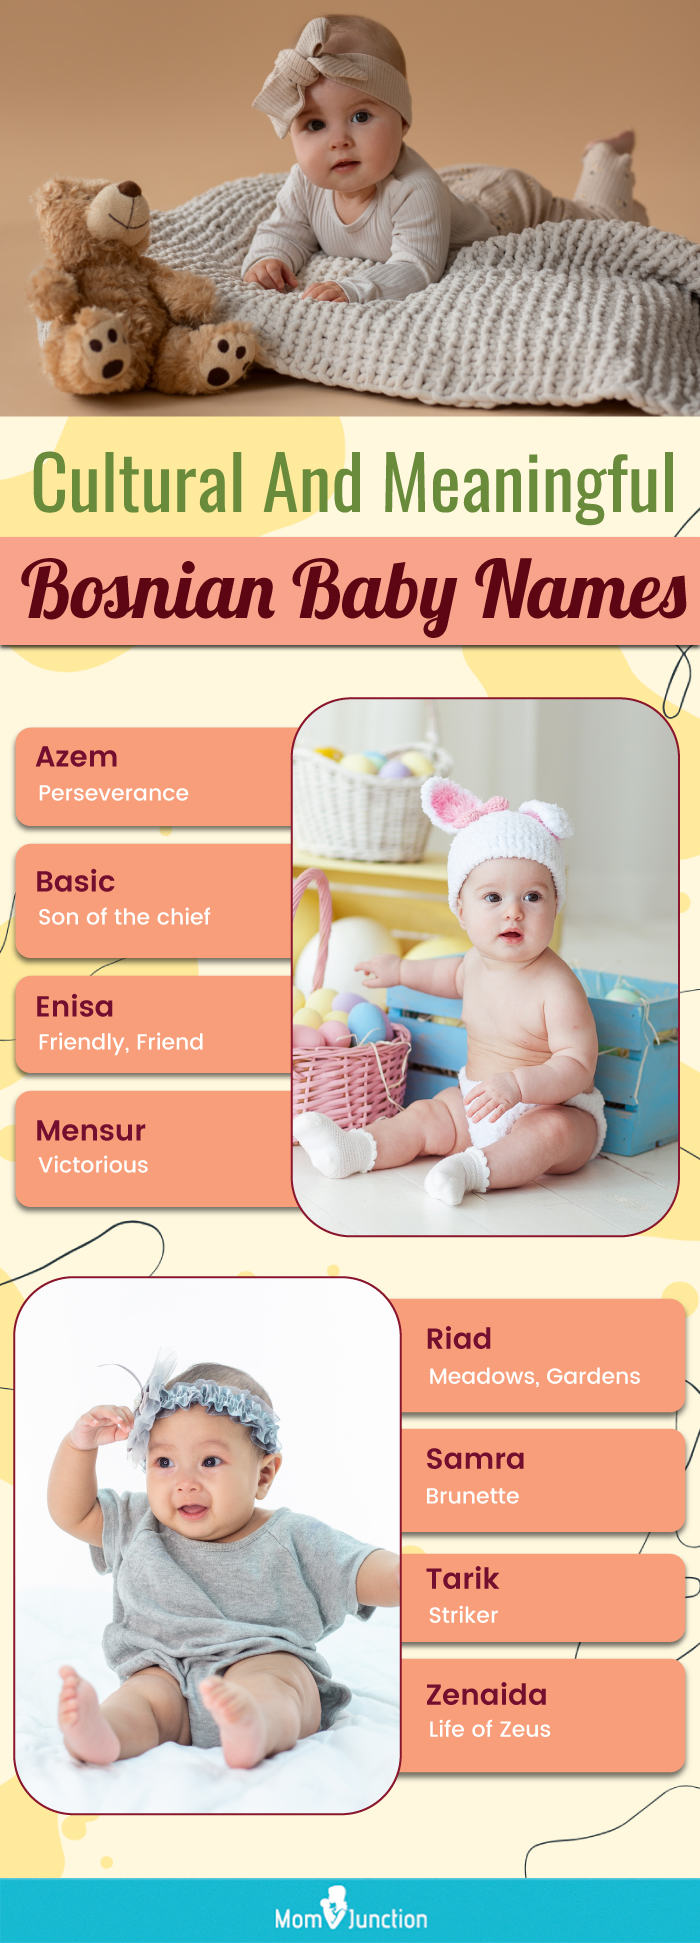 cultural and meaningful bosnian baby names (infographic)